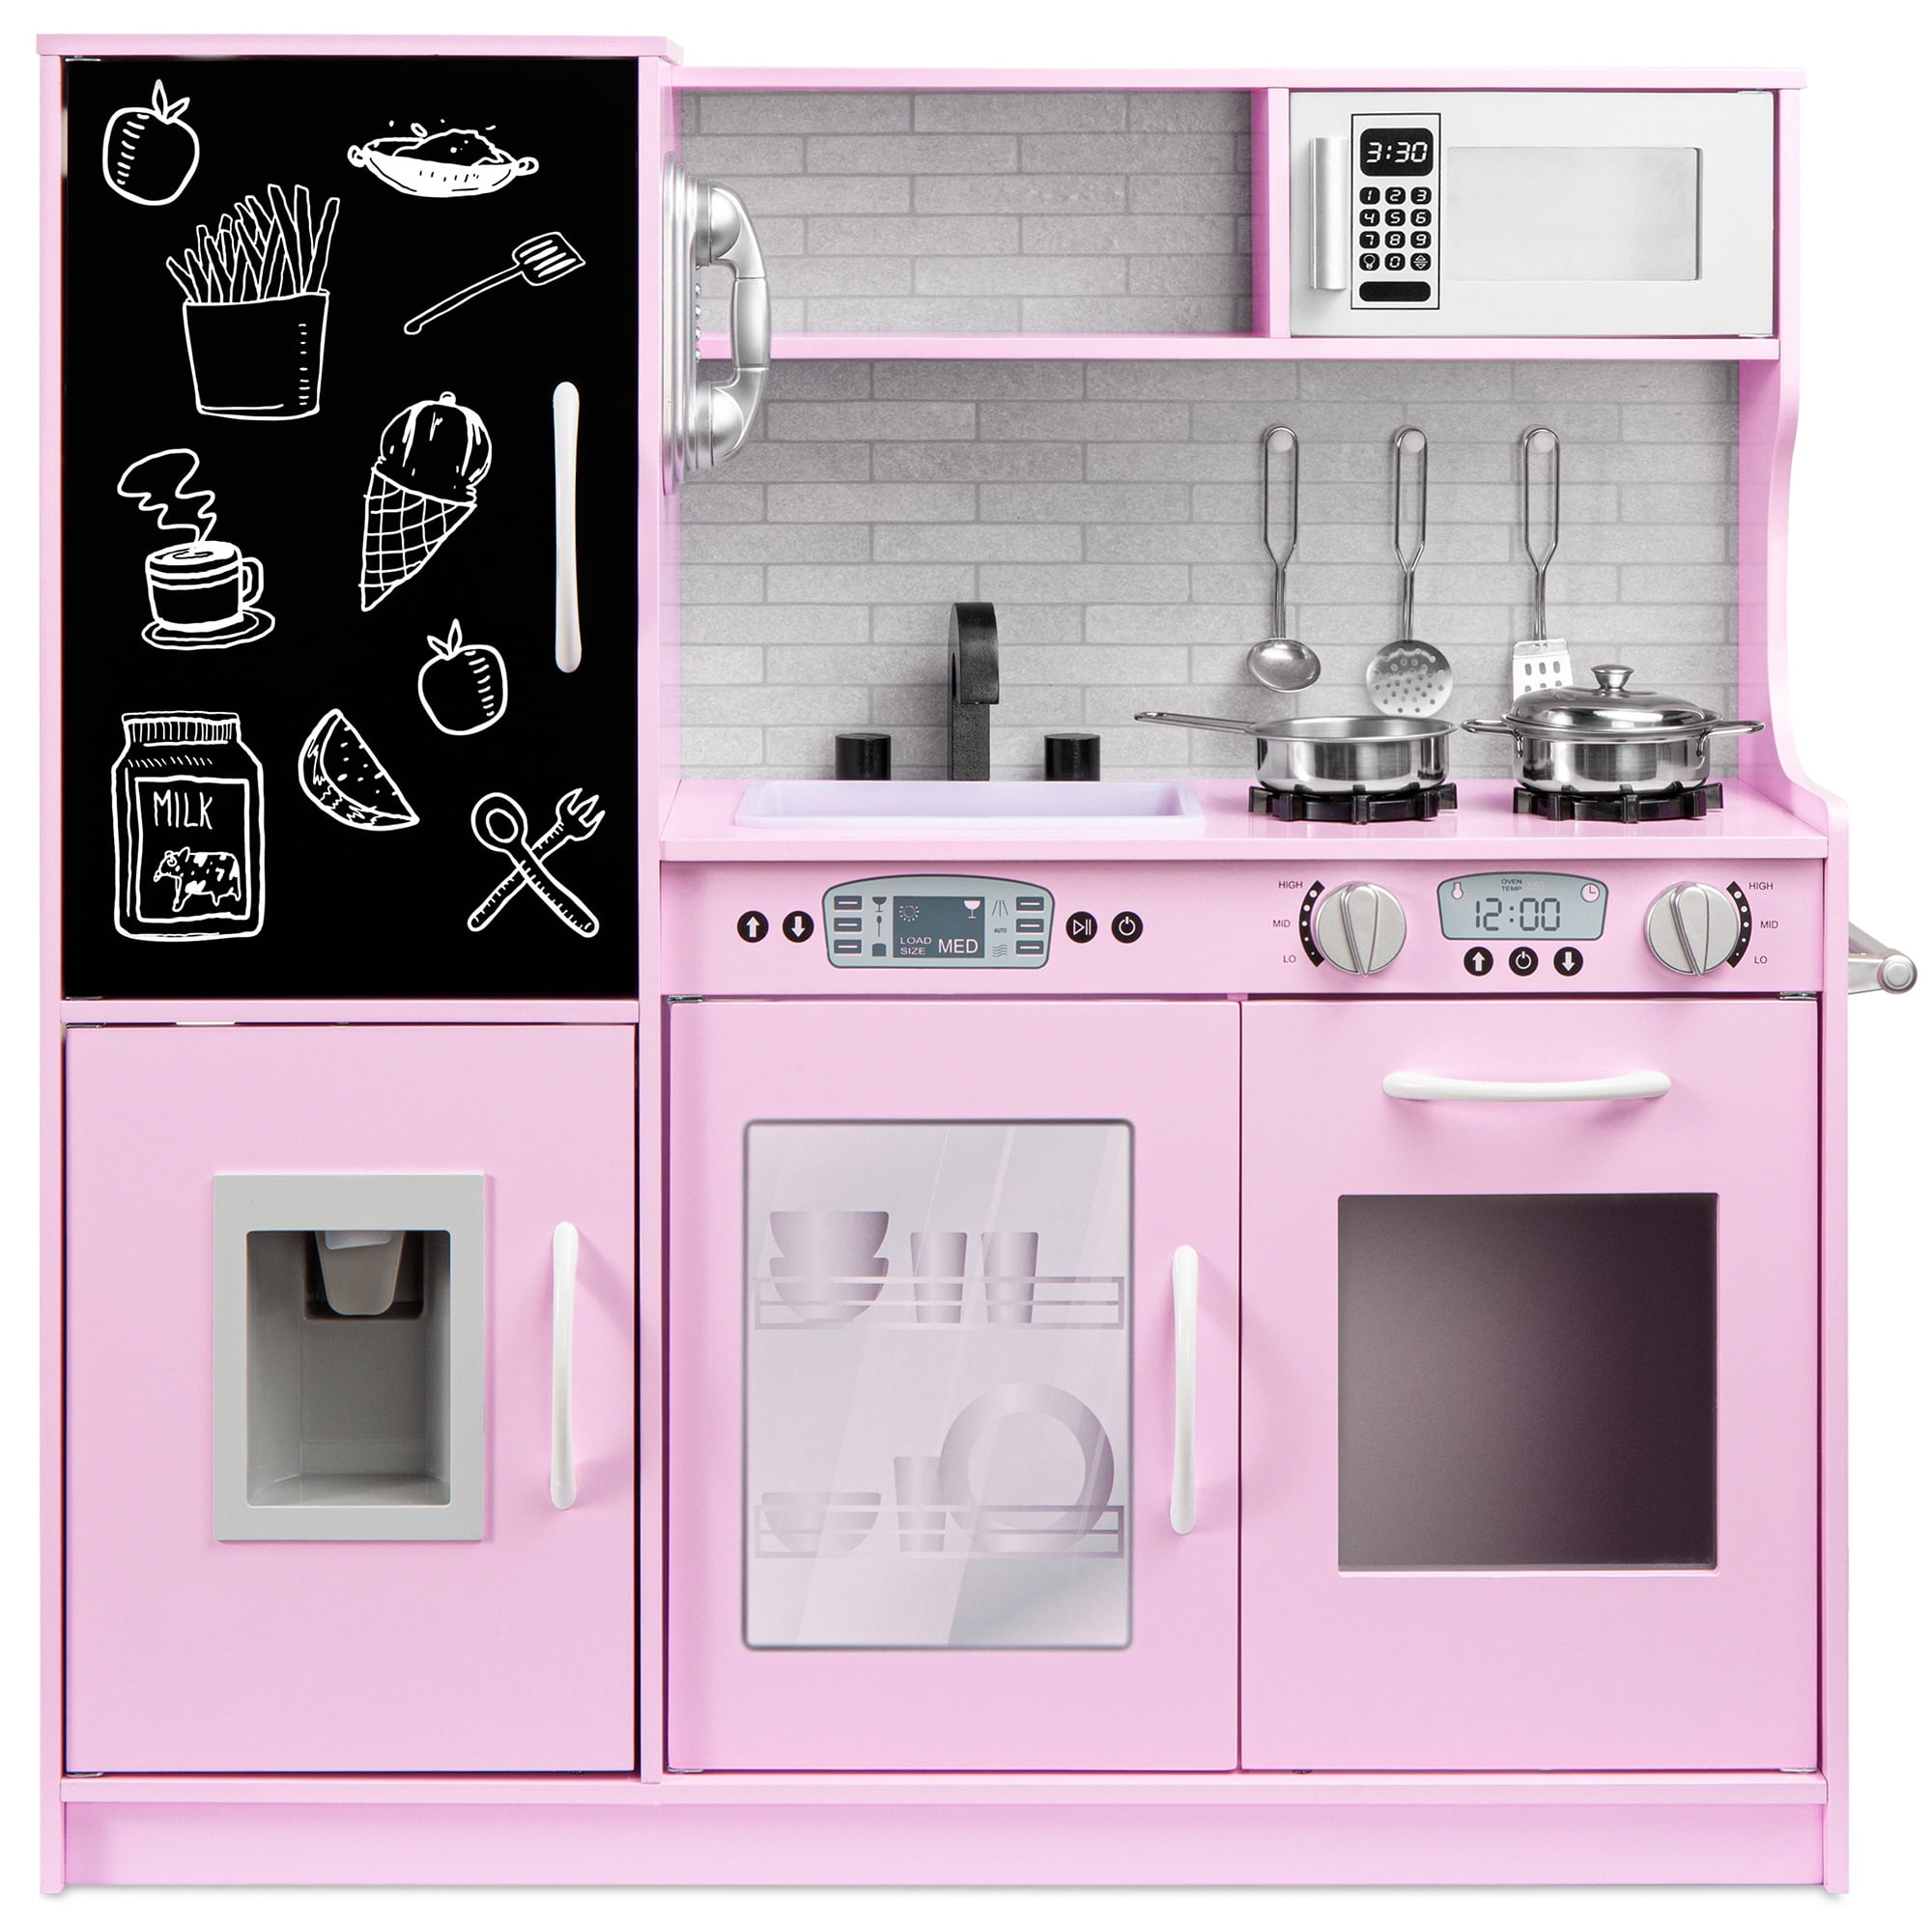 Teen says pink toy ovens discourage boys from kitchen play